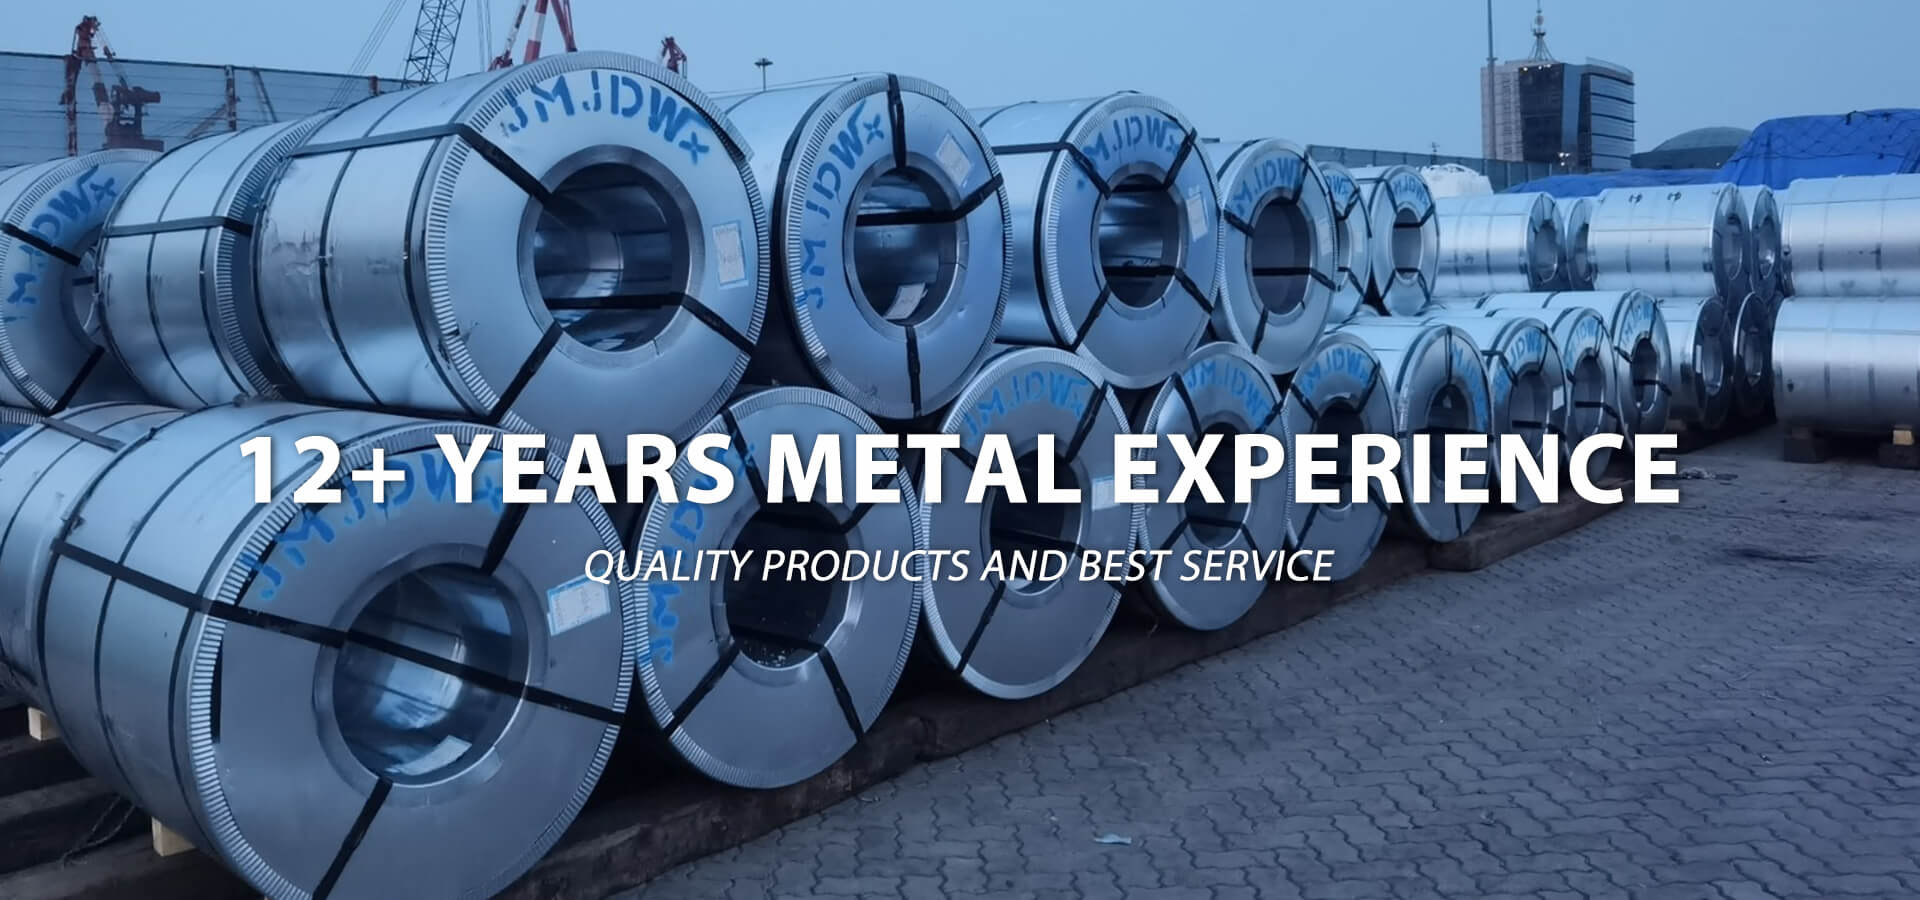 JMJDWX - 12+ YEARS METAL EXPERIENCE Quality Products And Best Service